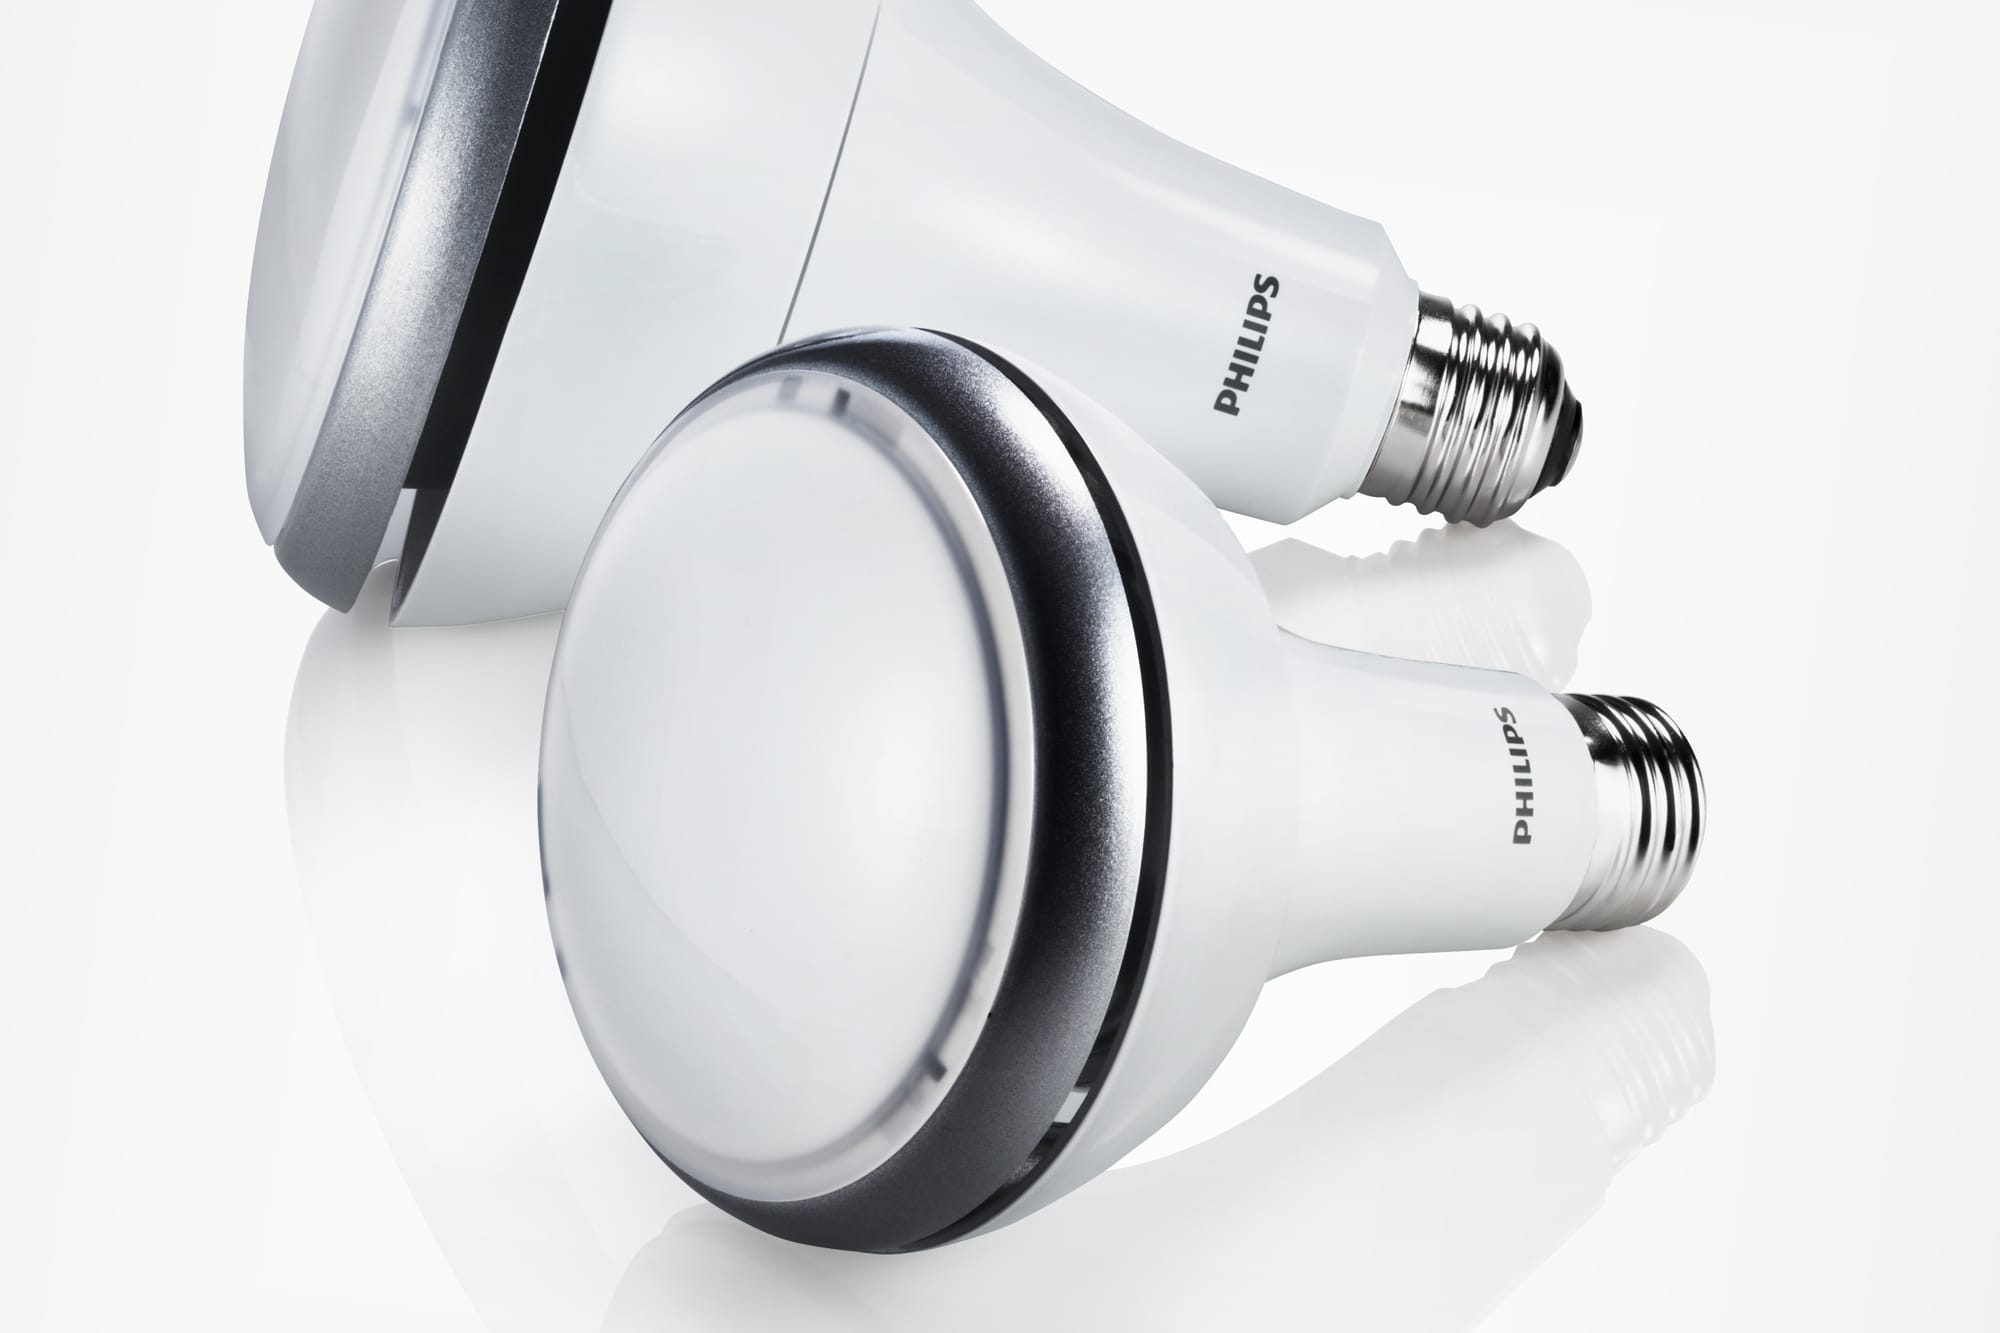 Philips Lighting Products Authorized Distributor and Dealer